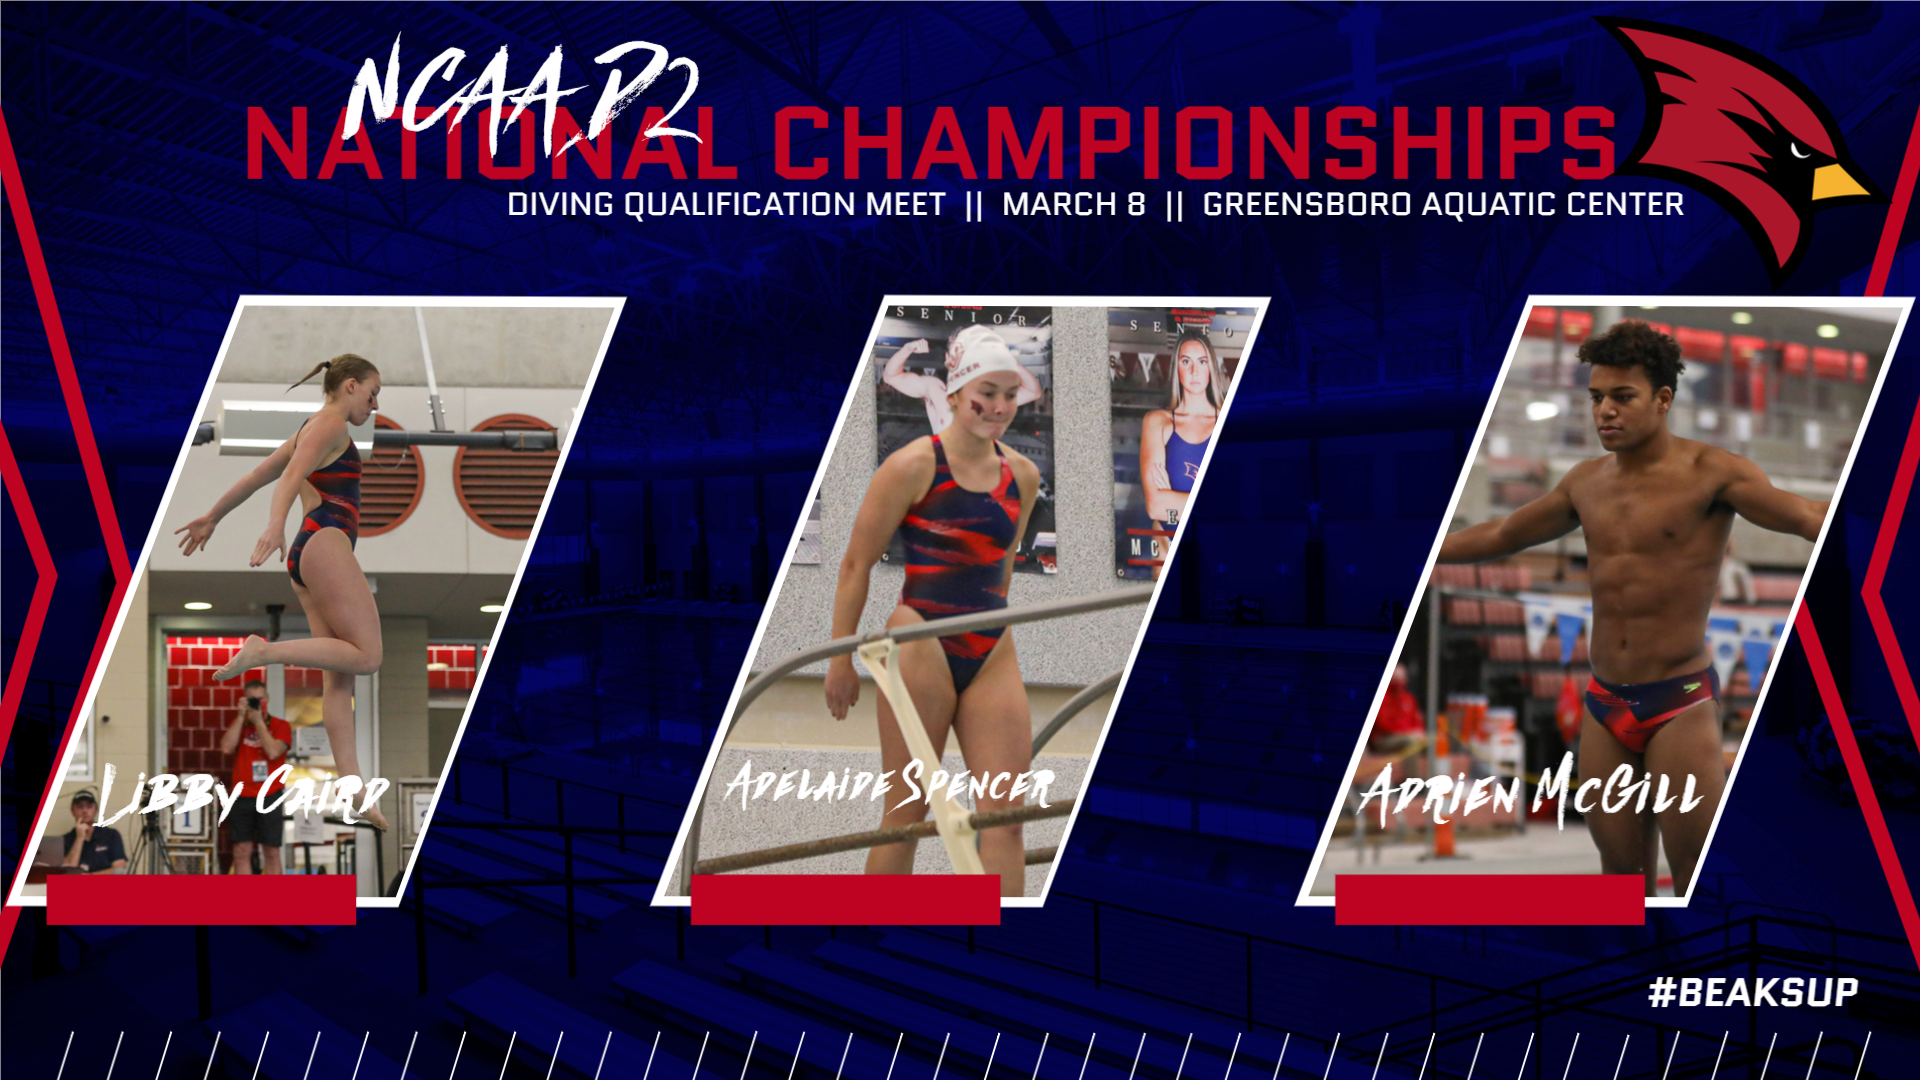 Three Cardinal divers set to compete at NCAA DII Nationals